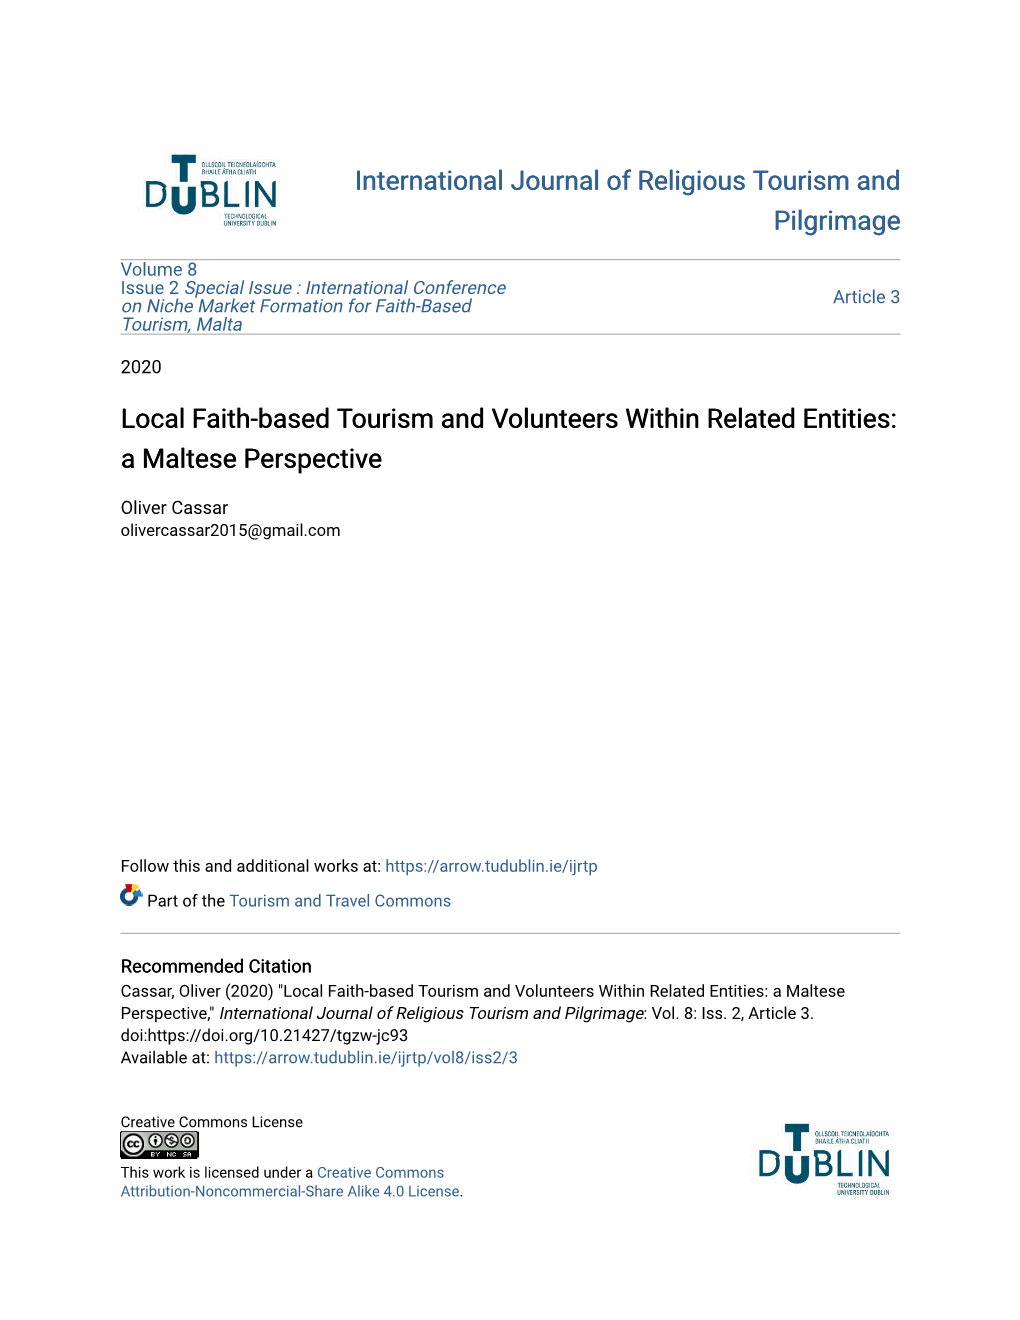 Local Faith-Based Tourism and Volunteers Within Related Entities: a Maltese Perspective